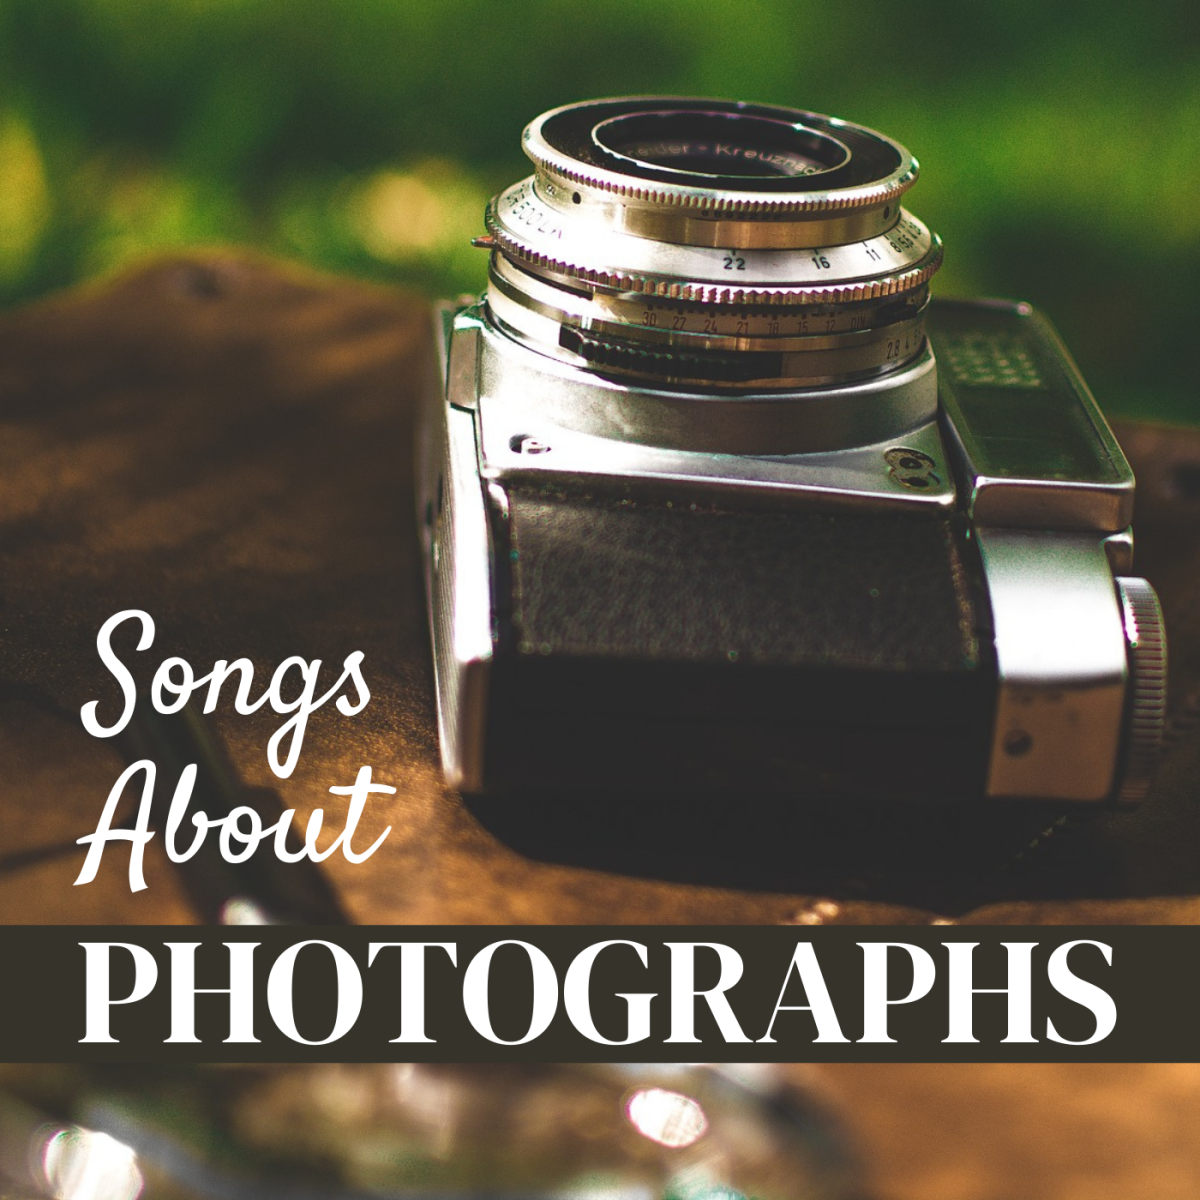 songs about photographs